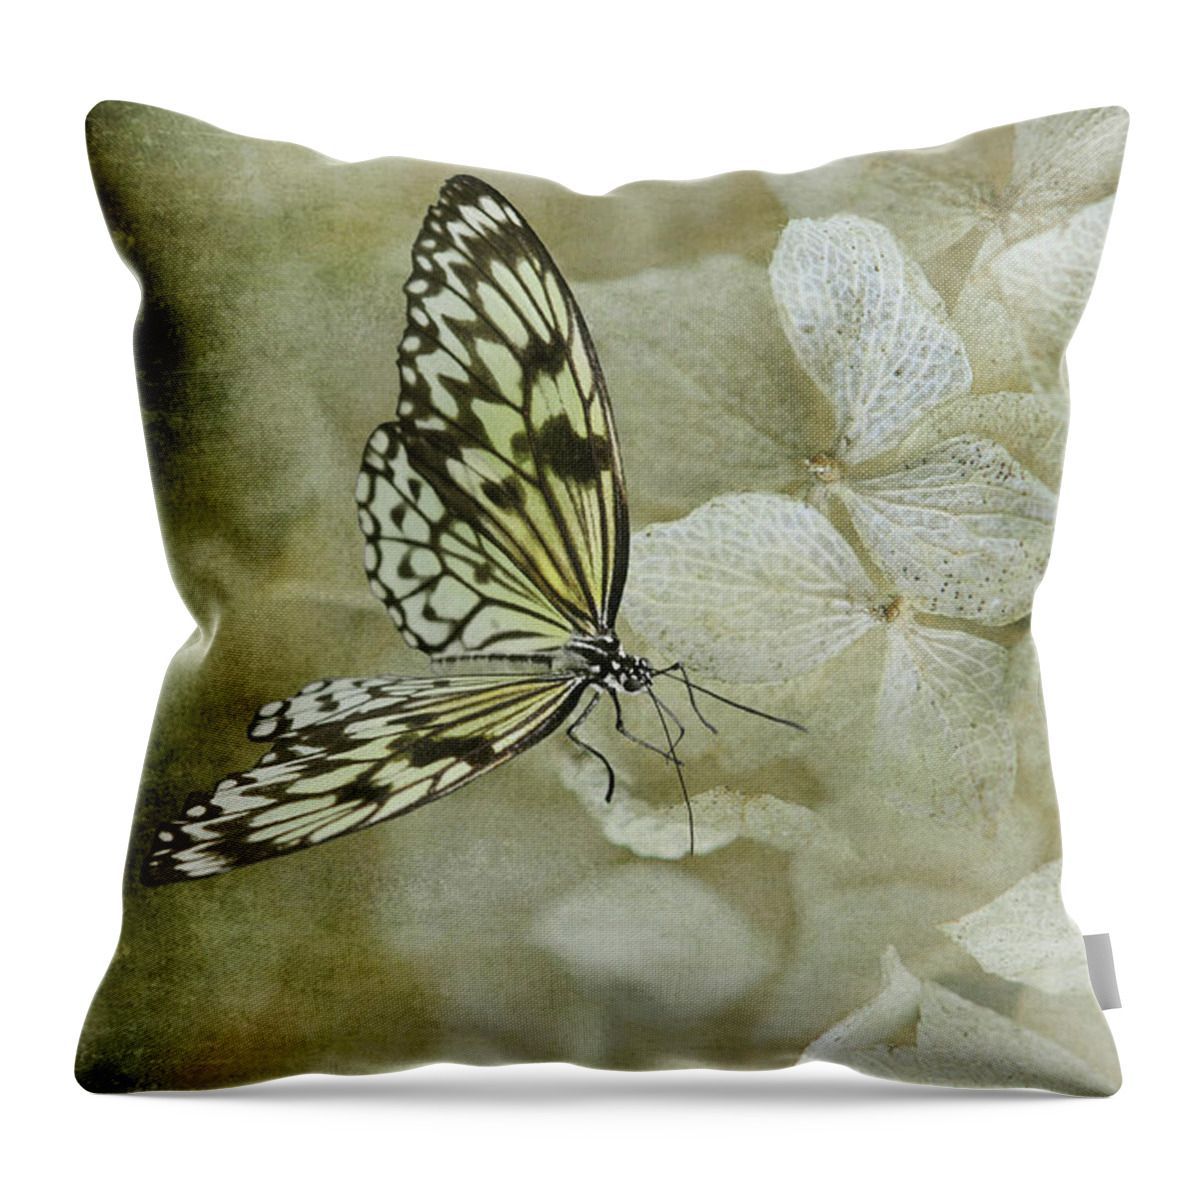 Butterfly Throw Pillow featuring the photograph A Lighter Touch by Lois Bryan